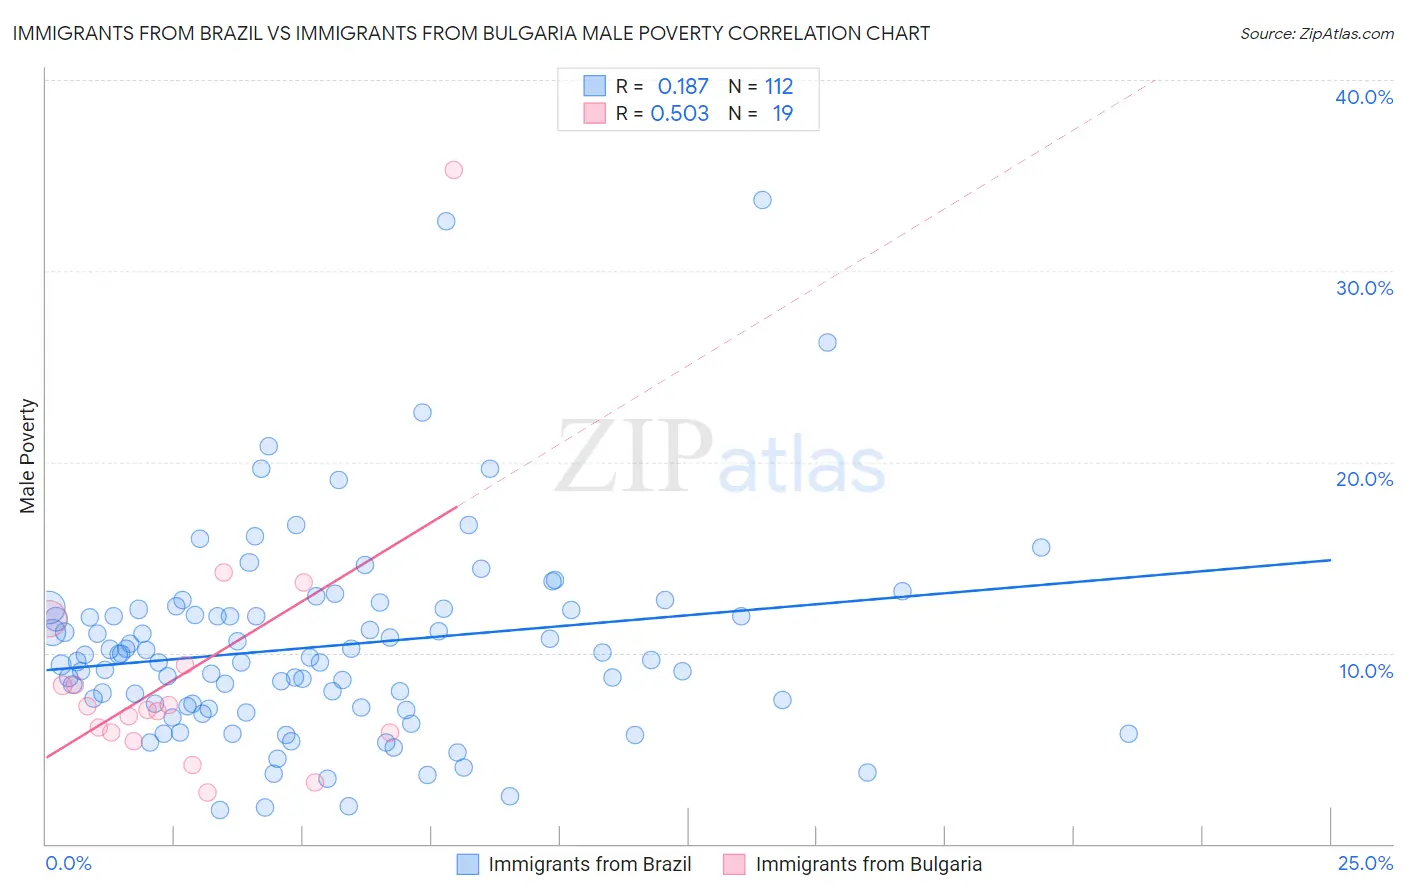 Immigrants from Brazil vs Immigrants from Bulgaria Male Poverty